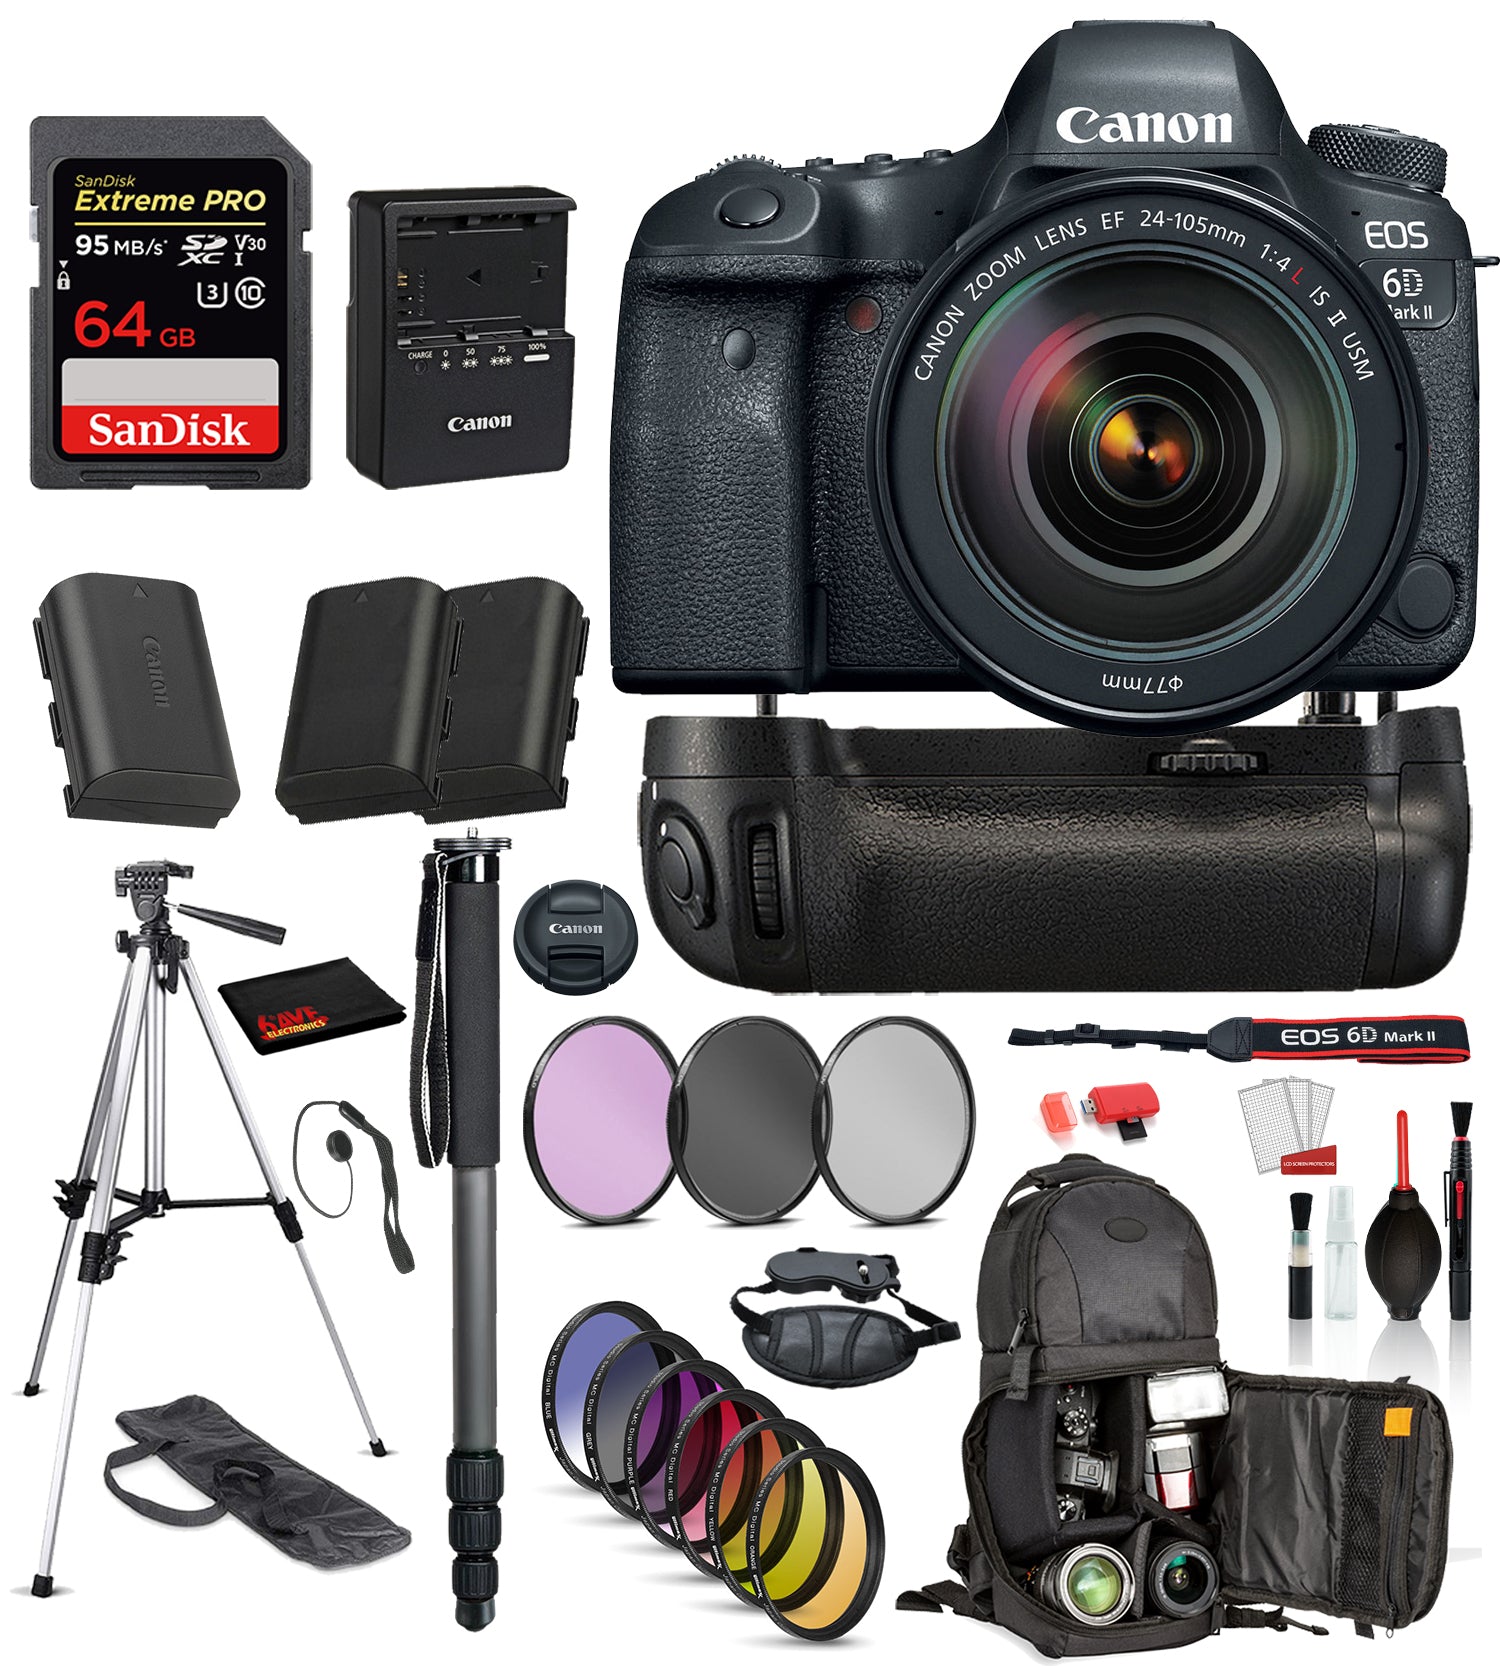 Canon EOS 6D Mark II DSLR Camera with 24-105mm f/4L II Lens  ? Battery Grip + SanDisk extreme pro 64gb SD + MORE